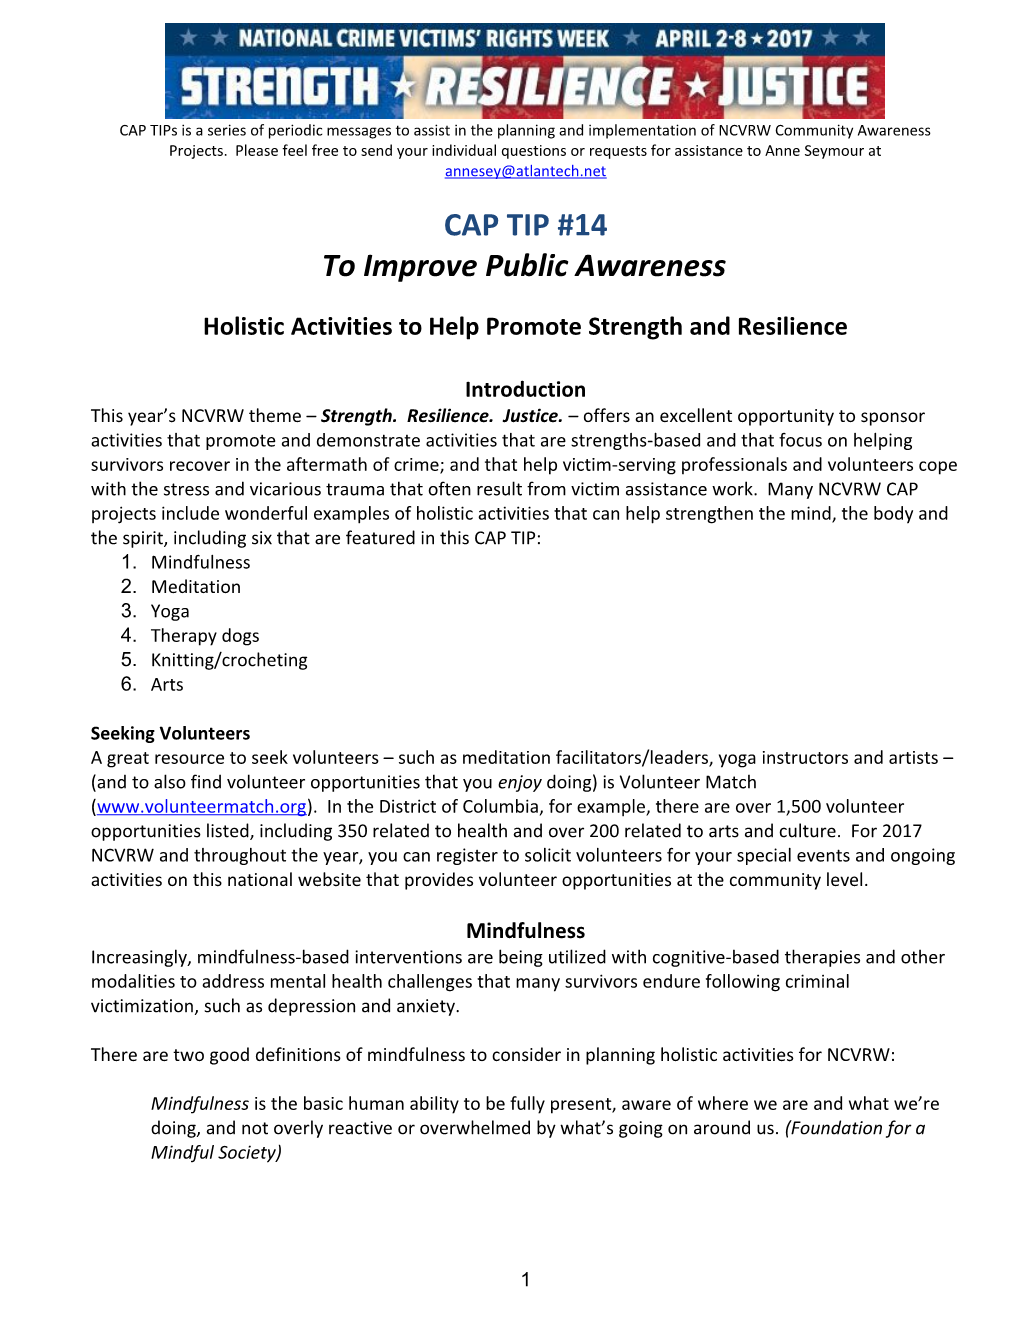 Holistic Activities to Help Promote Strength and Resilience